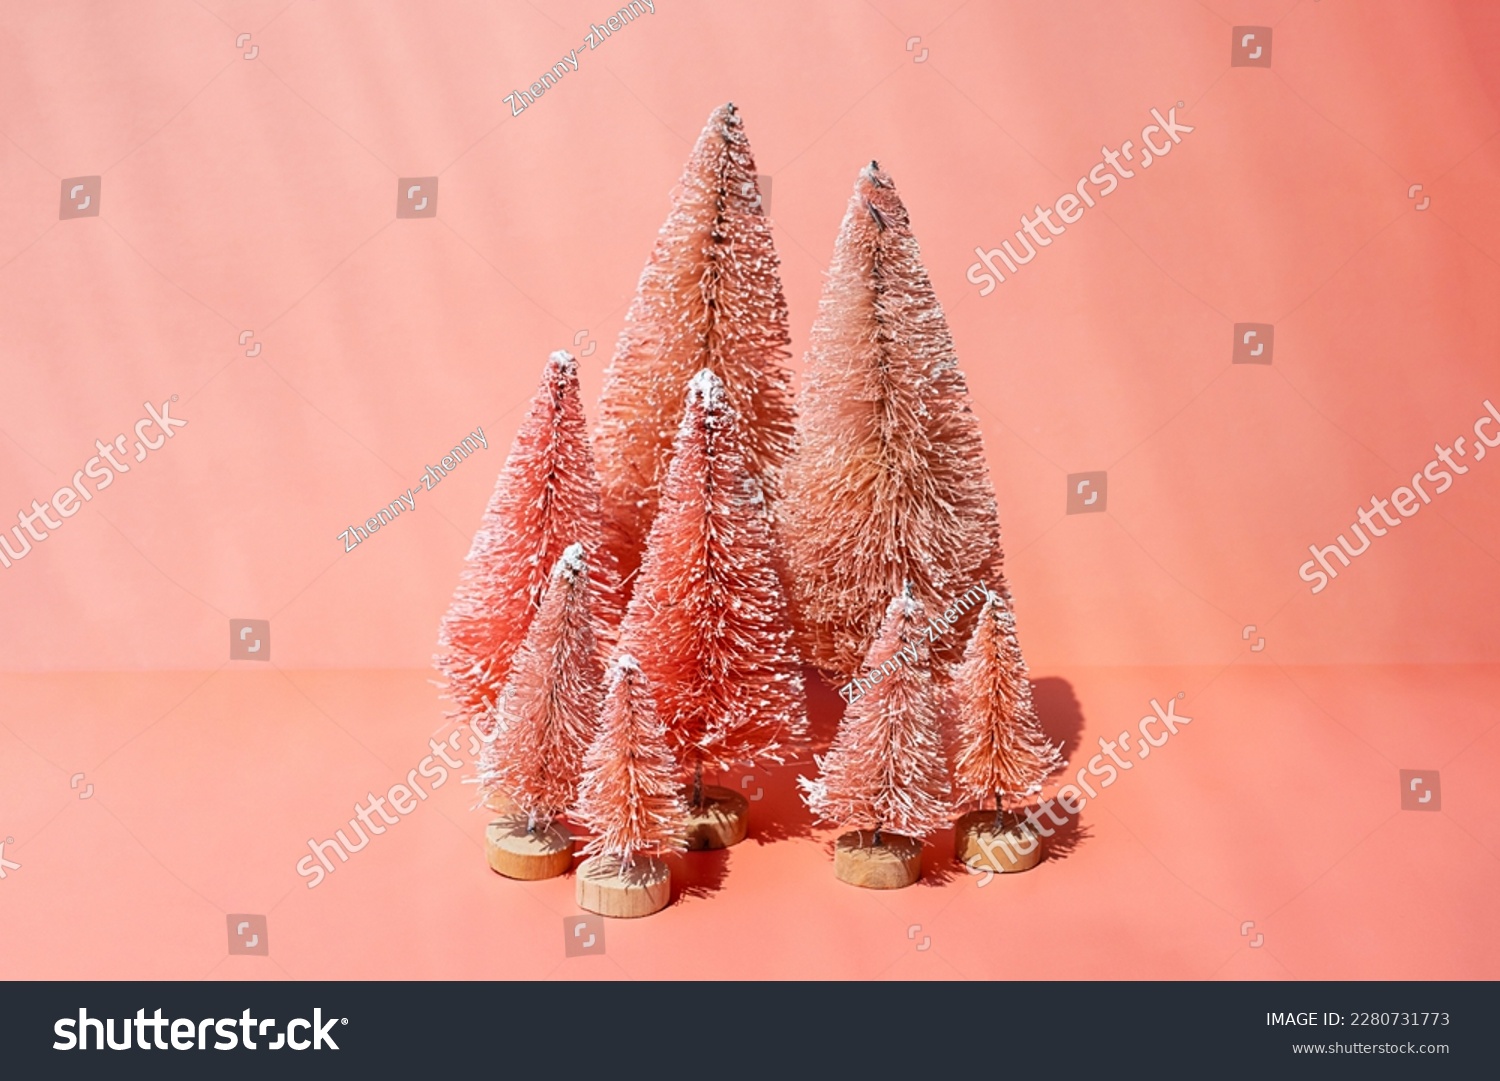 Bottle brush trees composition for winter holidays. Miniature artificial Christmas trees collection. #2280731773